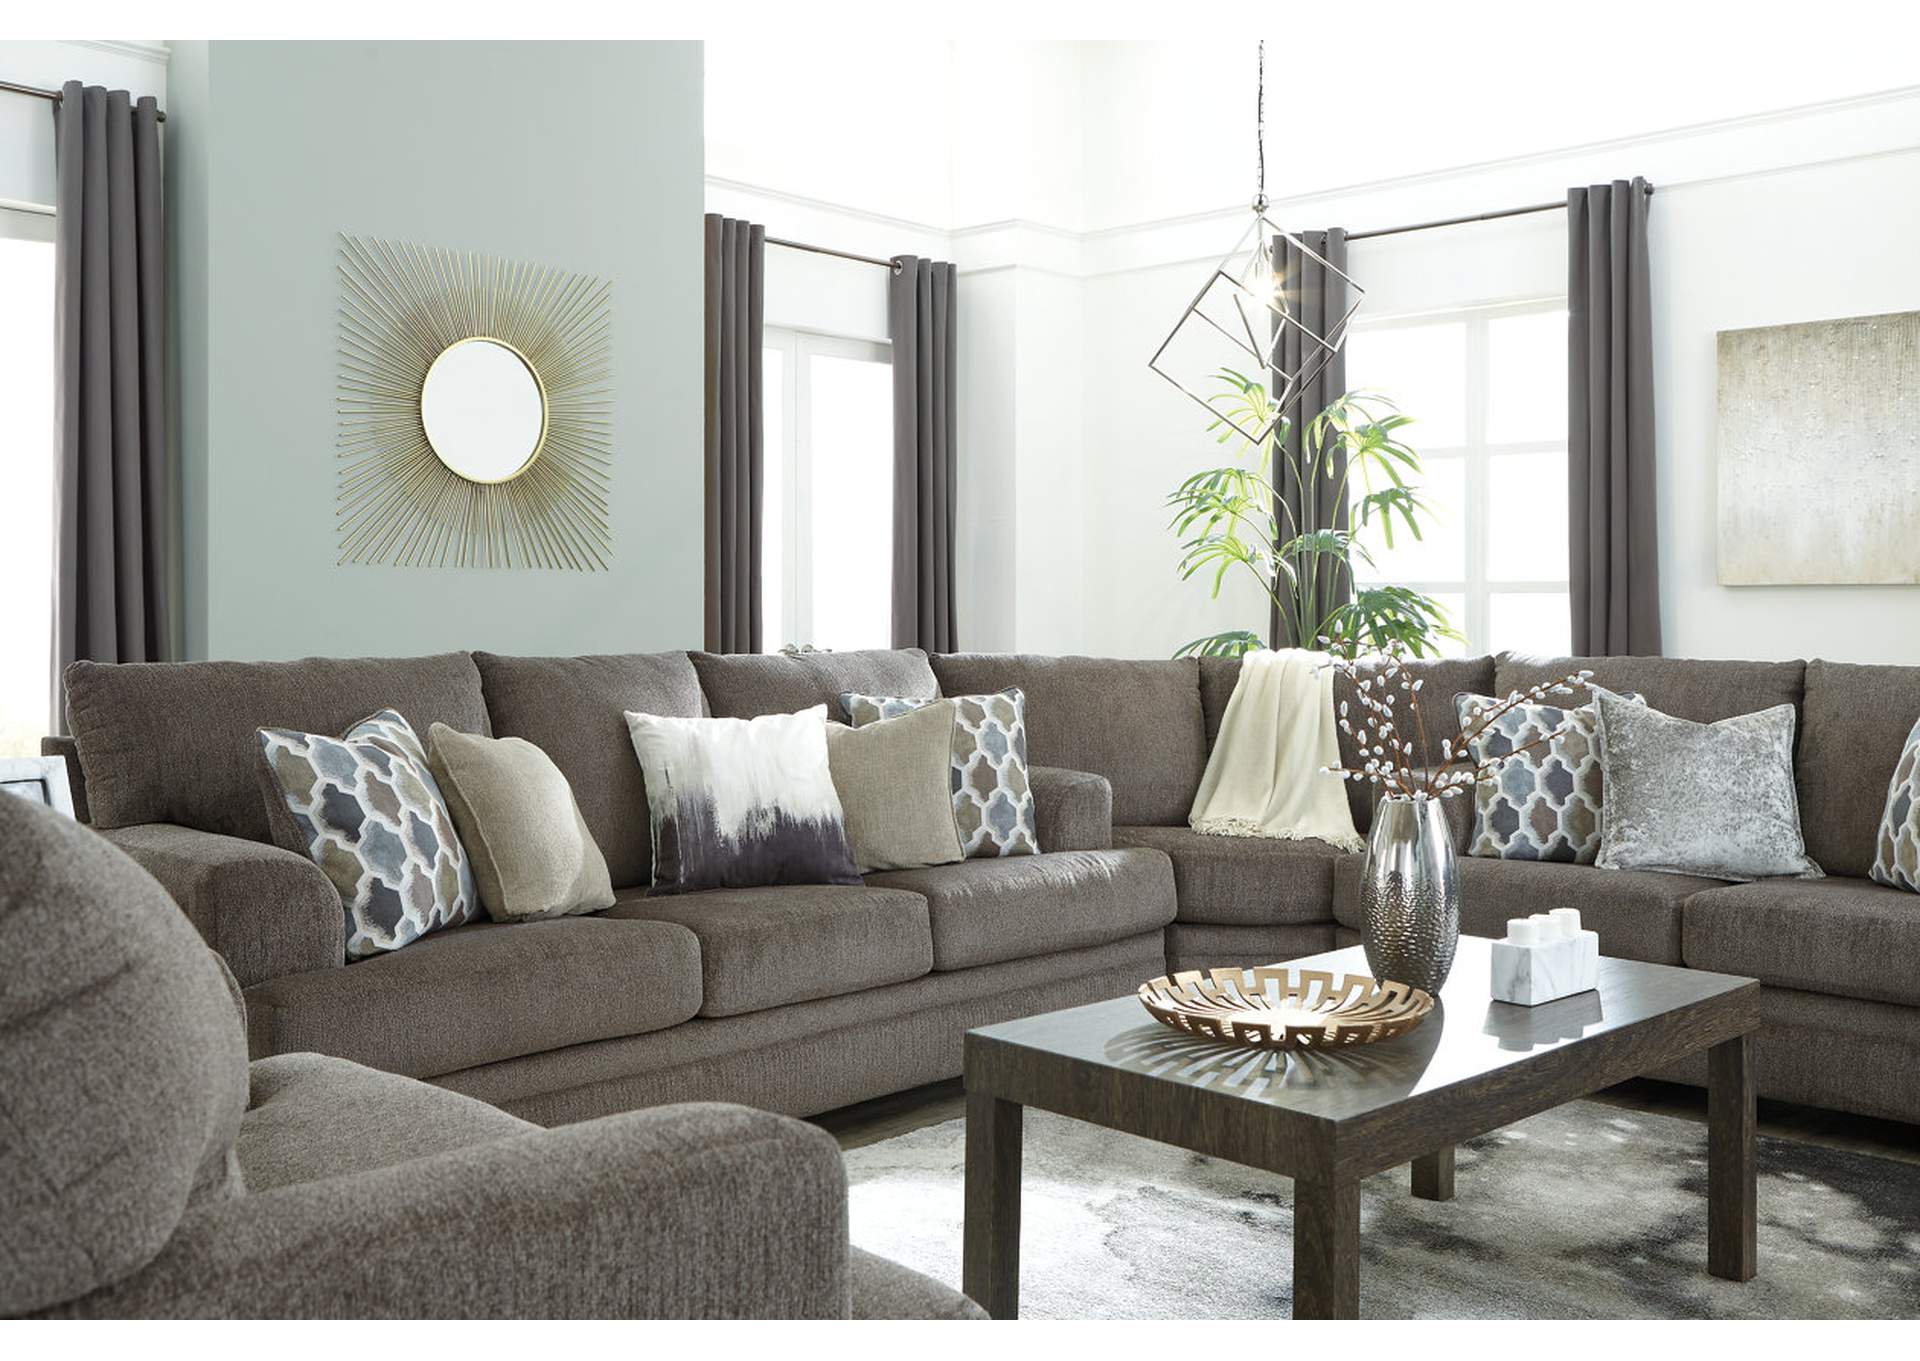 Dorsten 3-Piece Sectional,Signature Design By Ashley